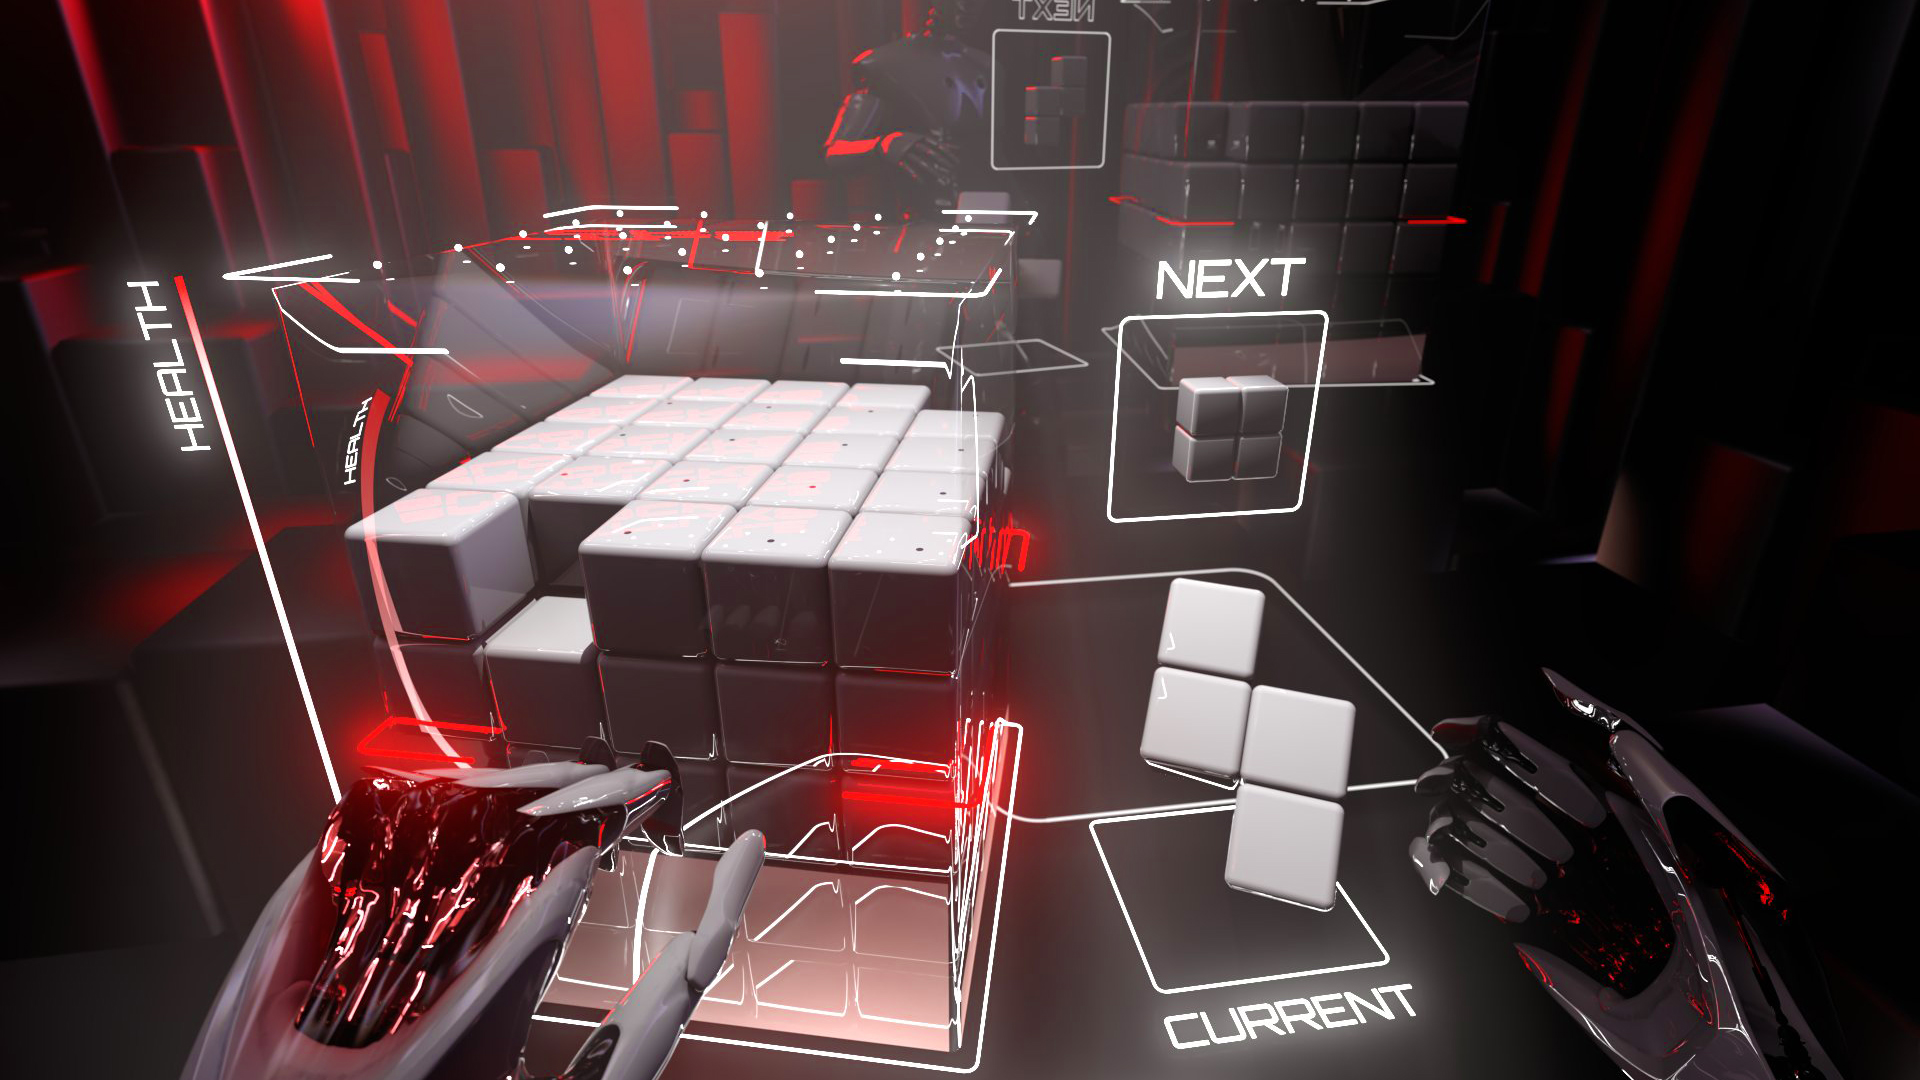 Tetris-Inspired PvP VR Game Battle Blocks Coming To Oculus Quest - VRScout